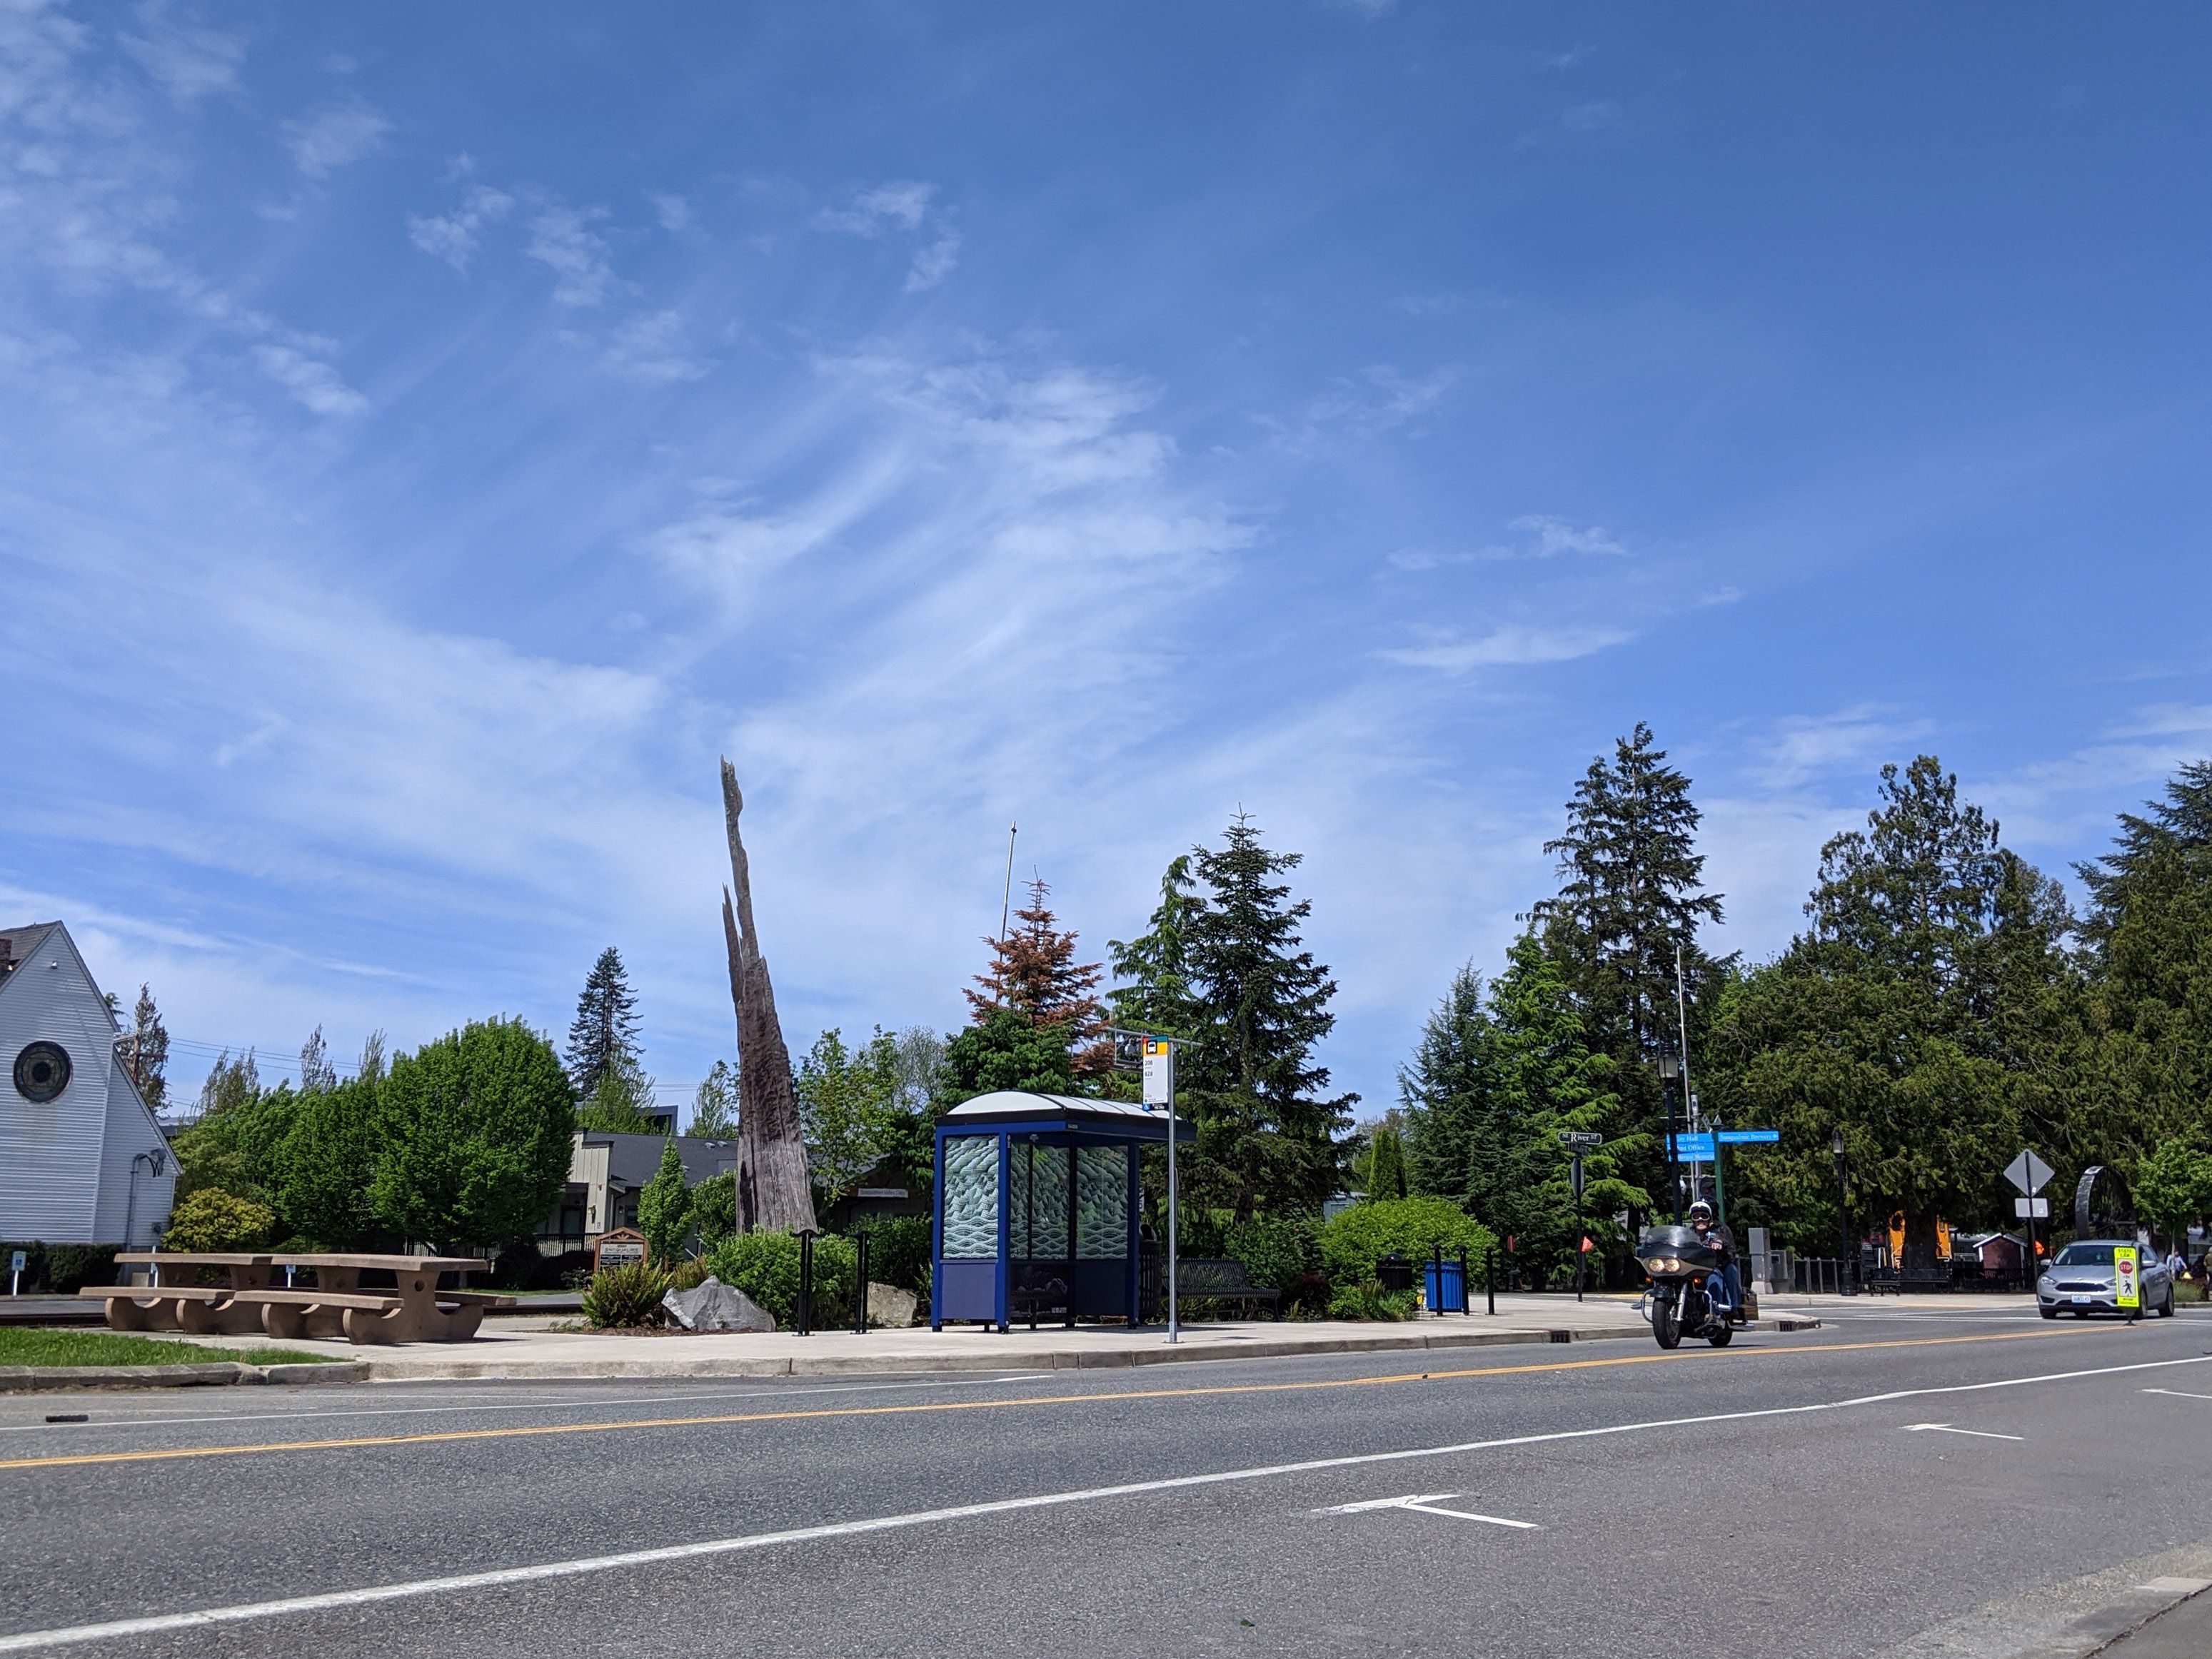 Snoqualmie, WA USA - circa May 2020: Street view of an empty metro bus stop on a bright, sunny day downtown